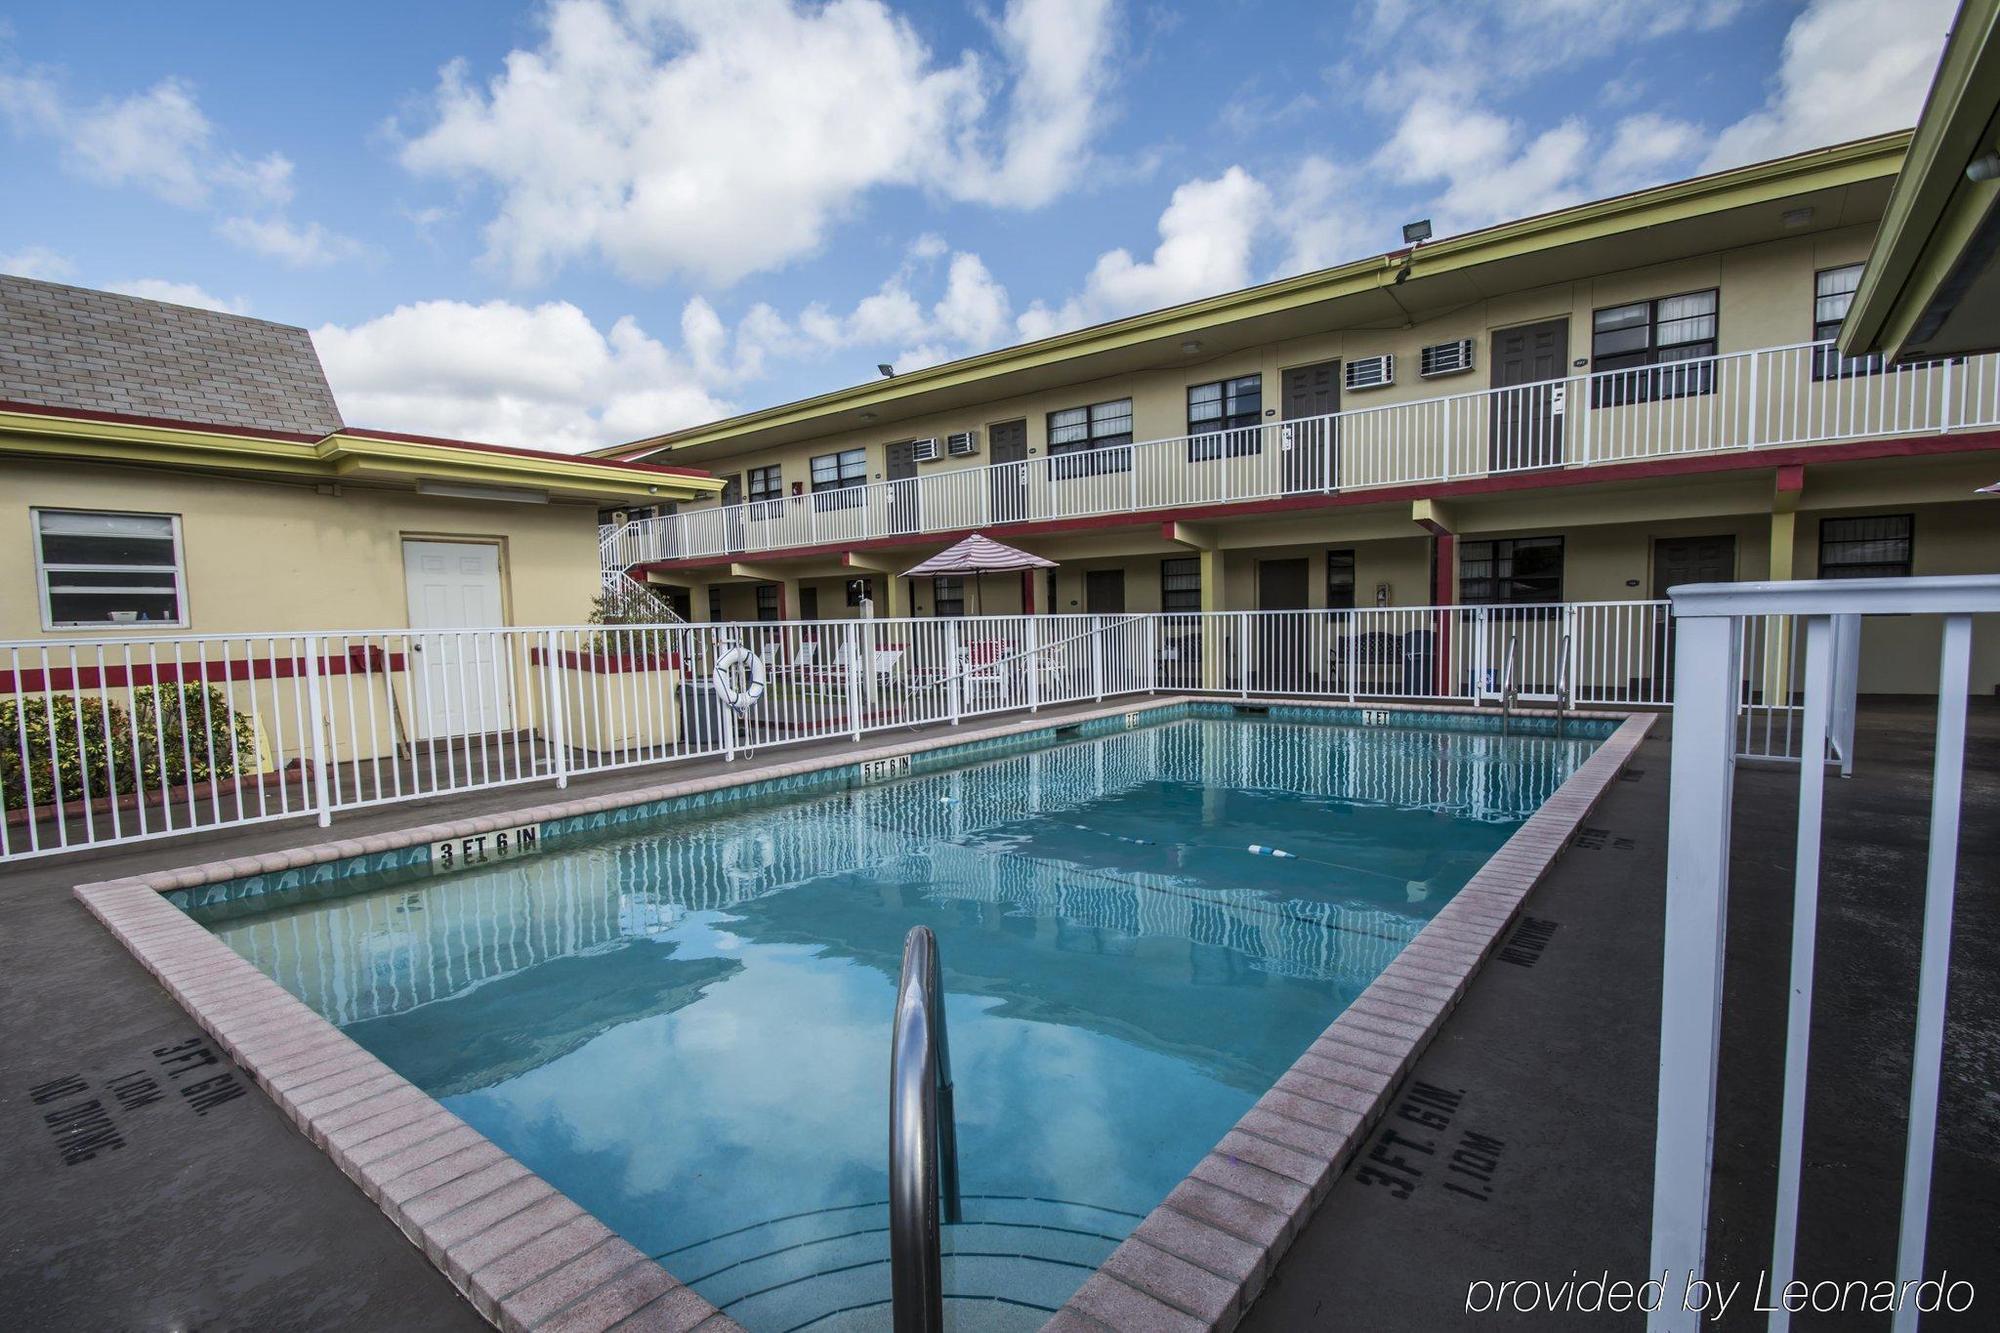 Econo Lodge Hollywood - Ft Lauderdale International Airport Exterior photo